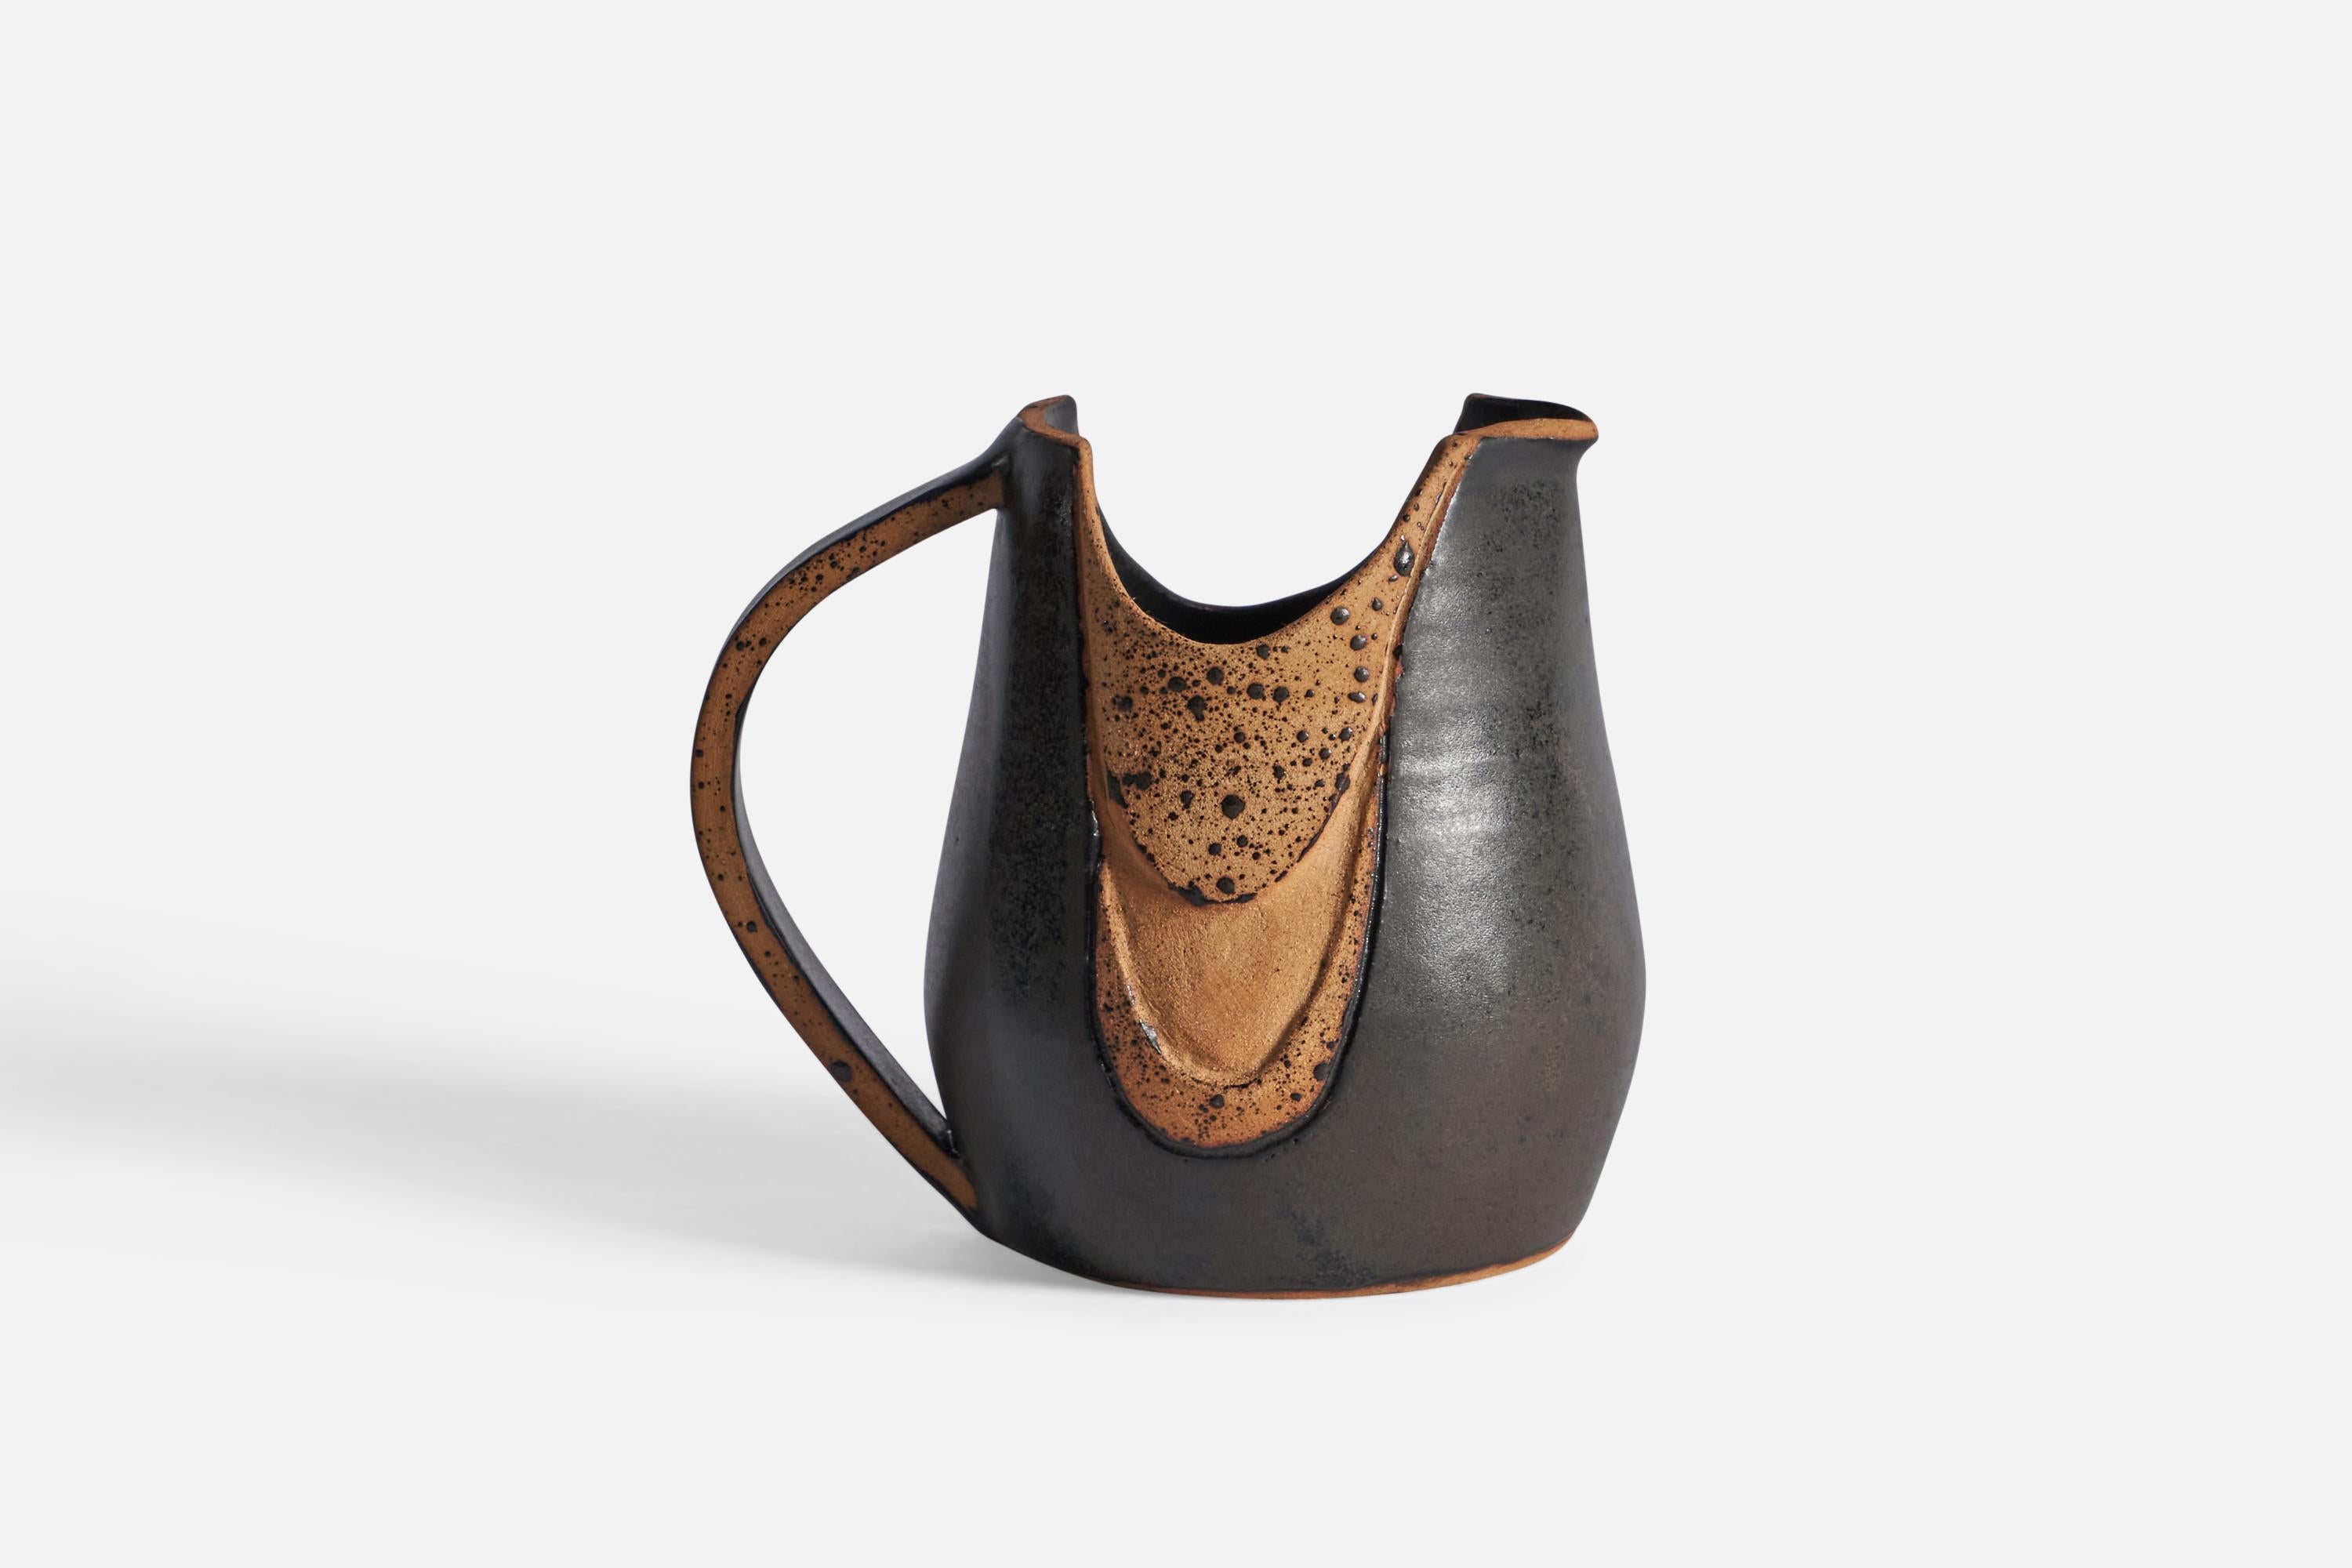 A semi-glazed brown stoneware pitcher, designed and produced in Denmark, c. 1960s.